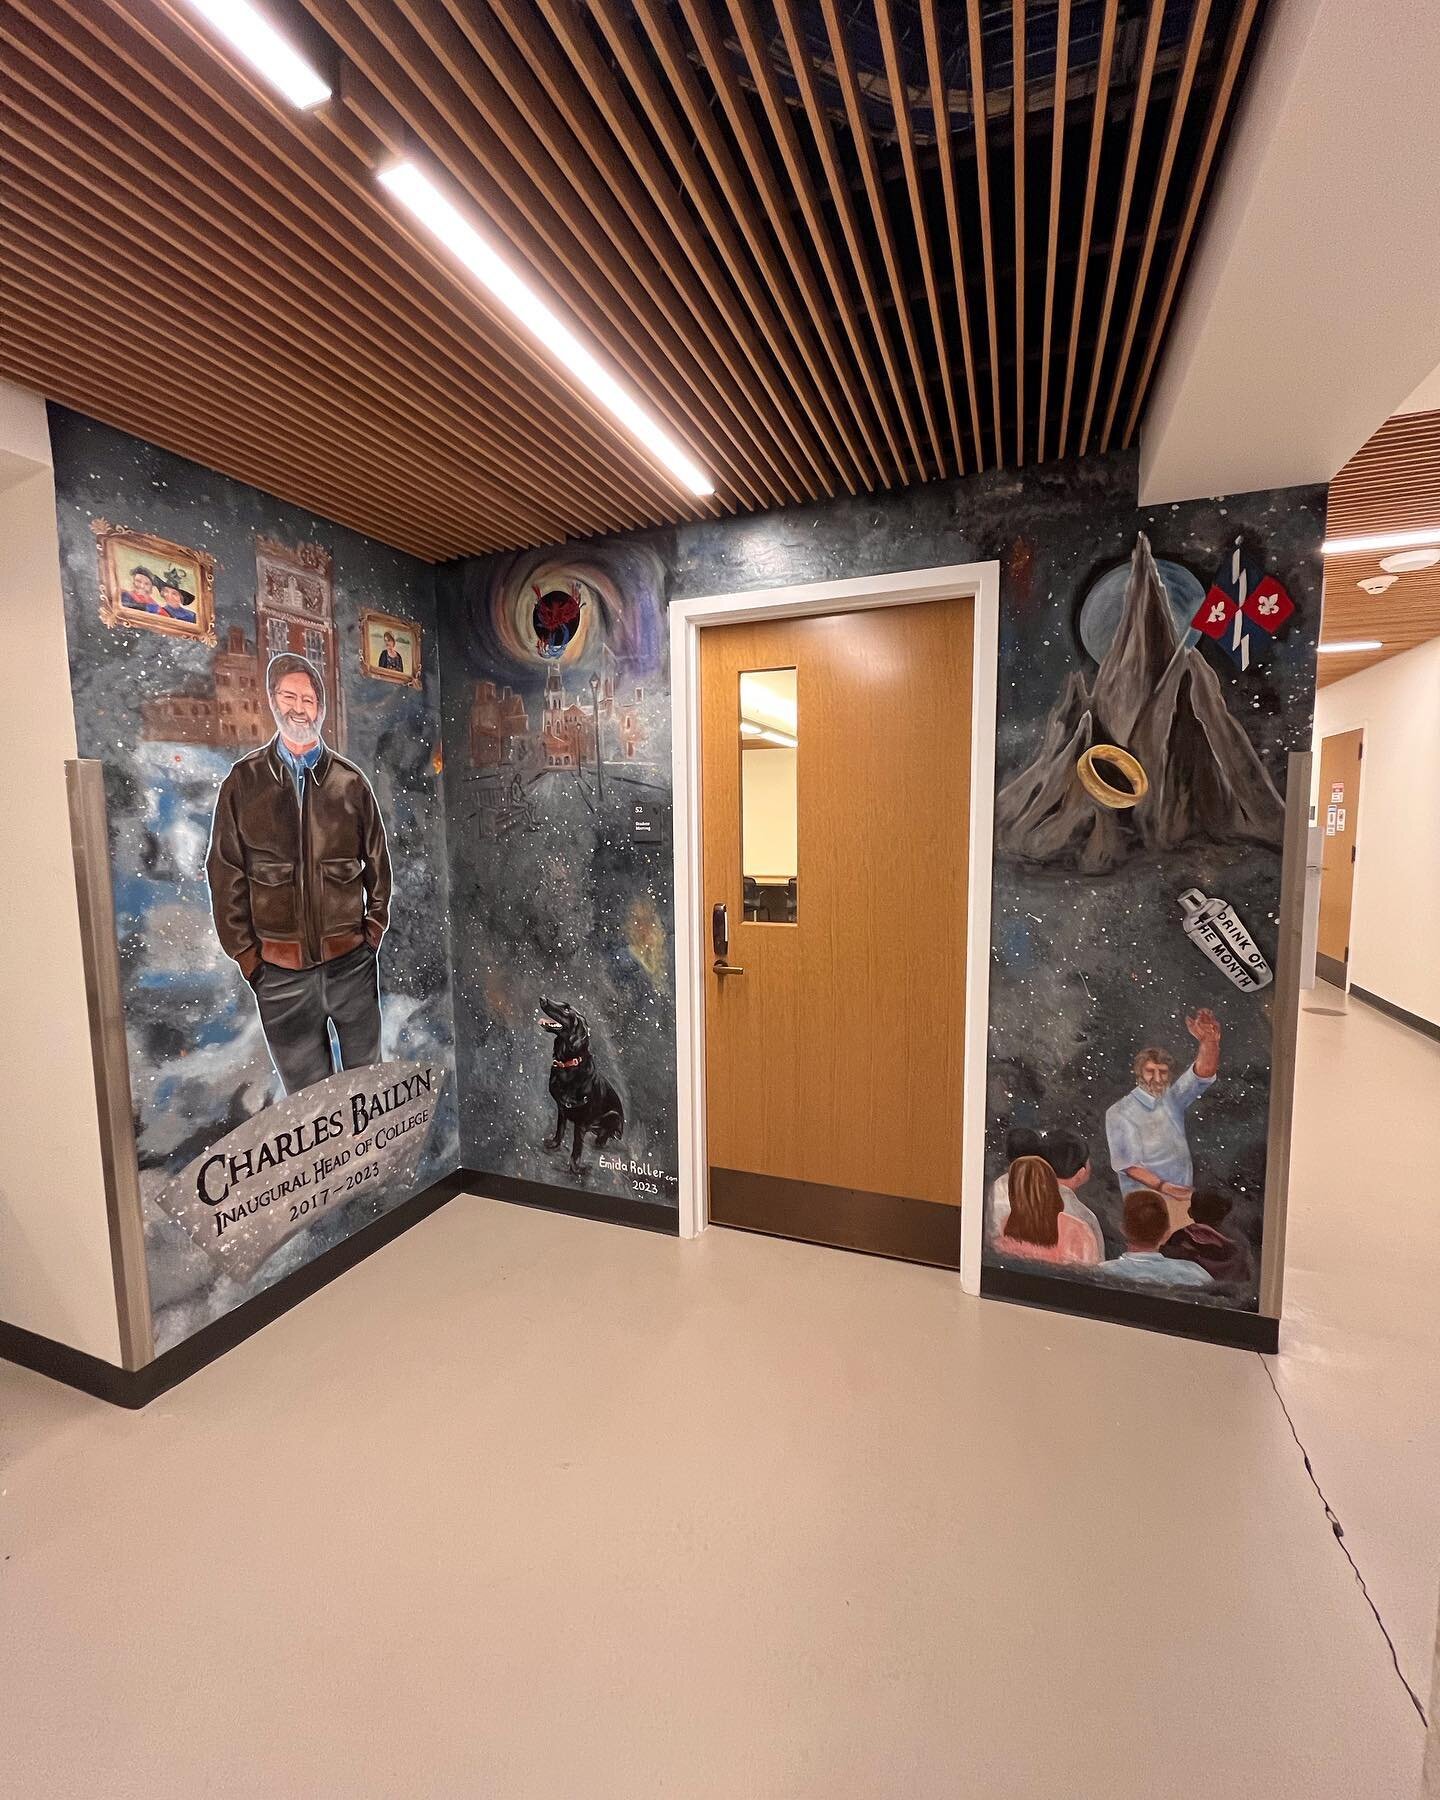 This mural commemorates the inaugural Head of College at the Benjamin Franklin College (2017-2023) at Yale University. Charles Bailyn is also a professor of astronomy and physics. A new tradition was started on the walls of lower level. Every Head of